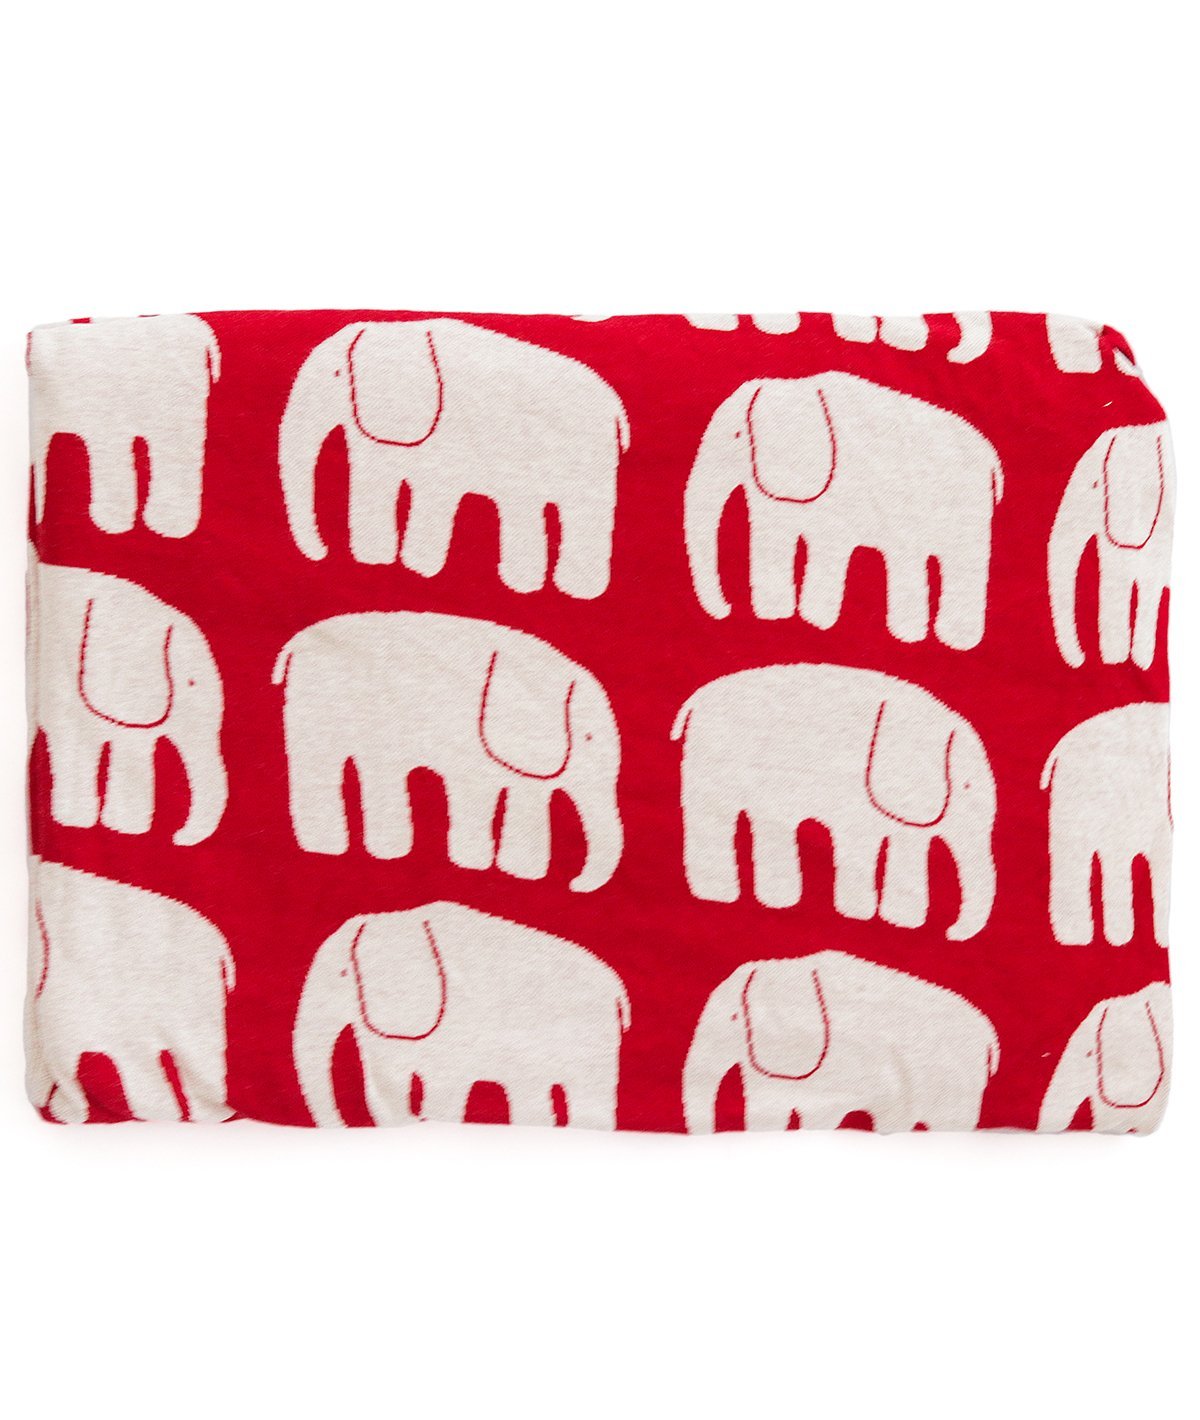 Elephant Red Cotton Knitted Cot Sheet & Pillow Set for Babies